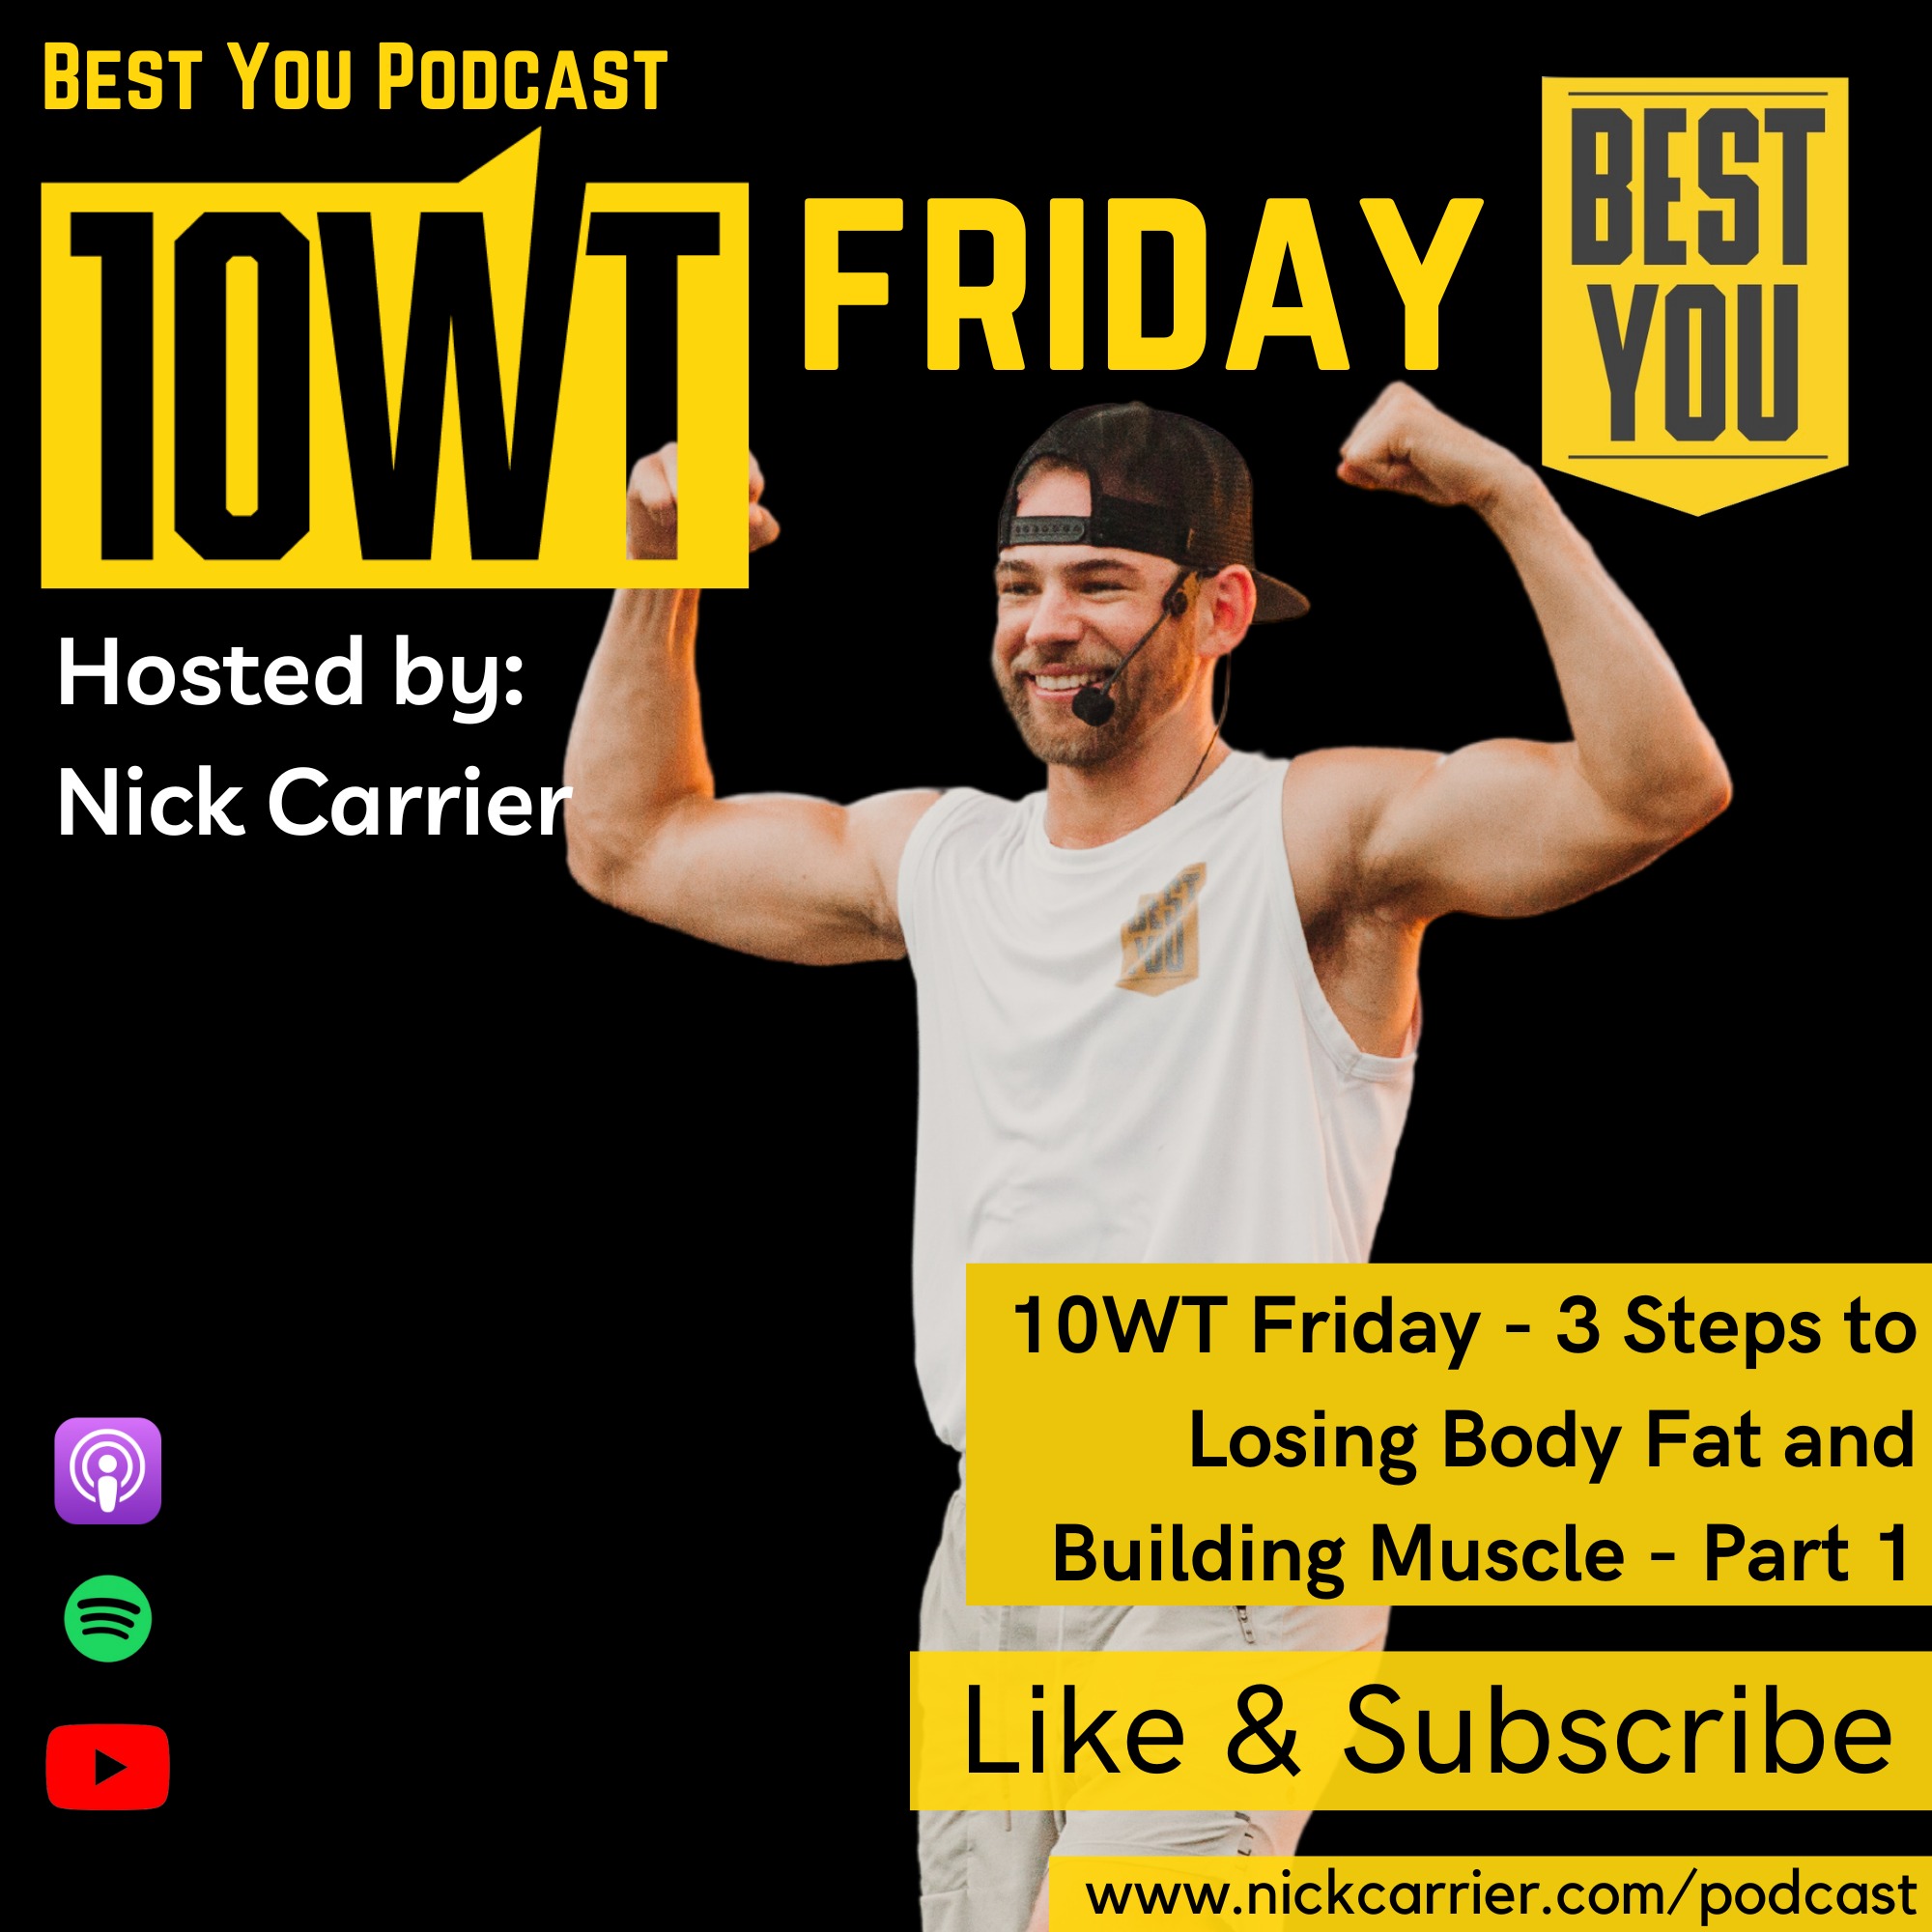 10WT Friday - 3 Steps to Losing Body Fat and Building Muscle - Part 1